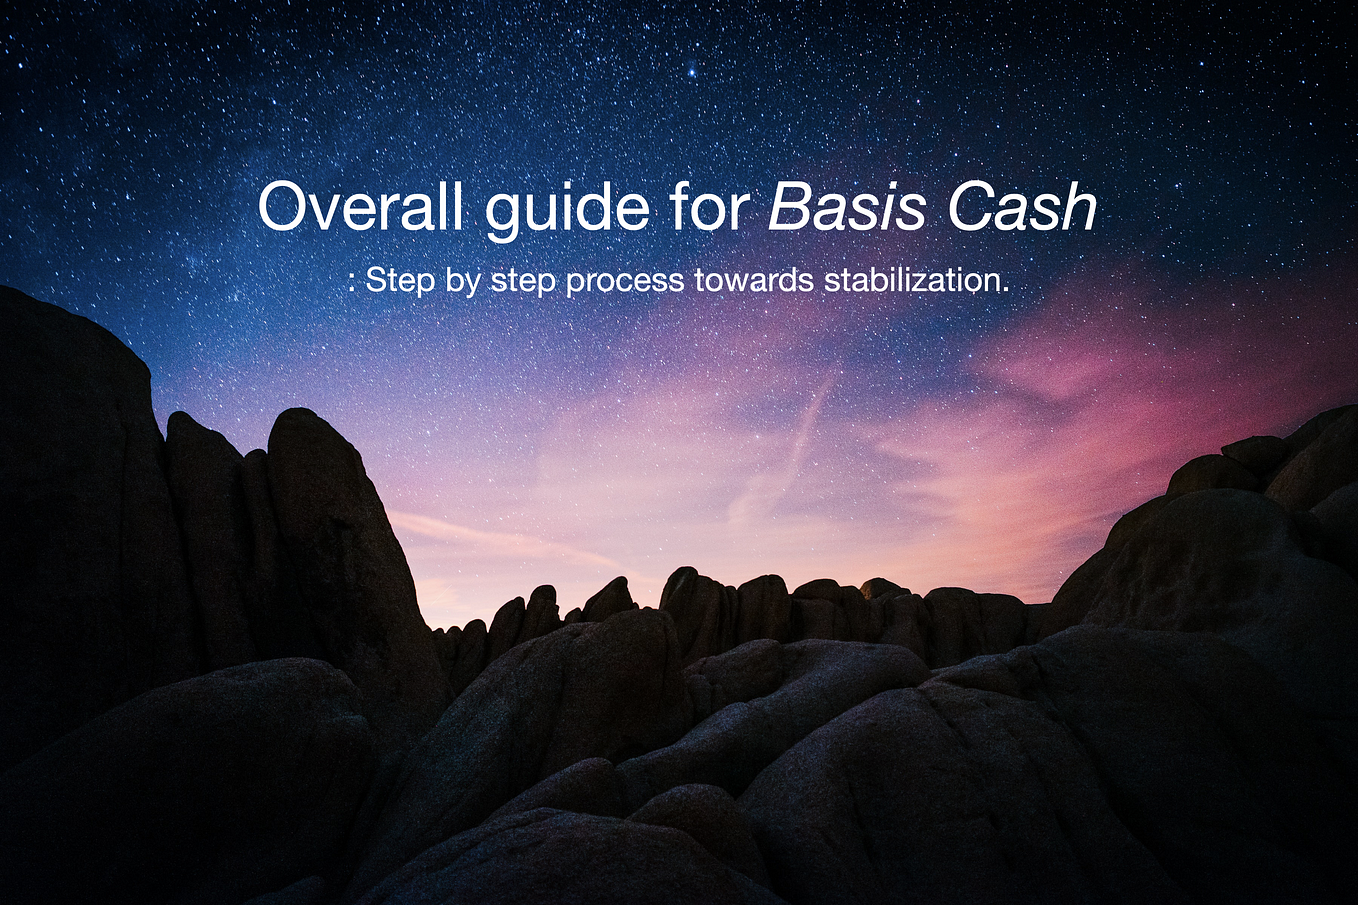 Overall guide for Basis Cash